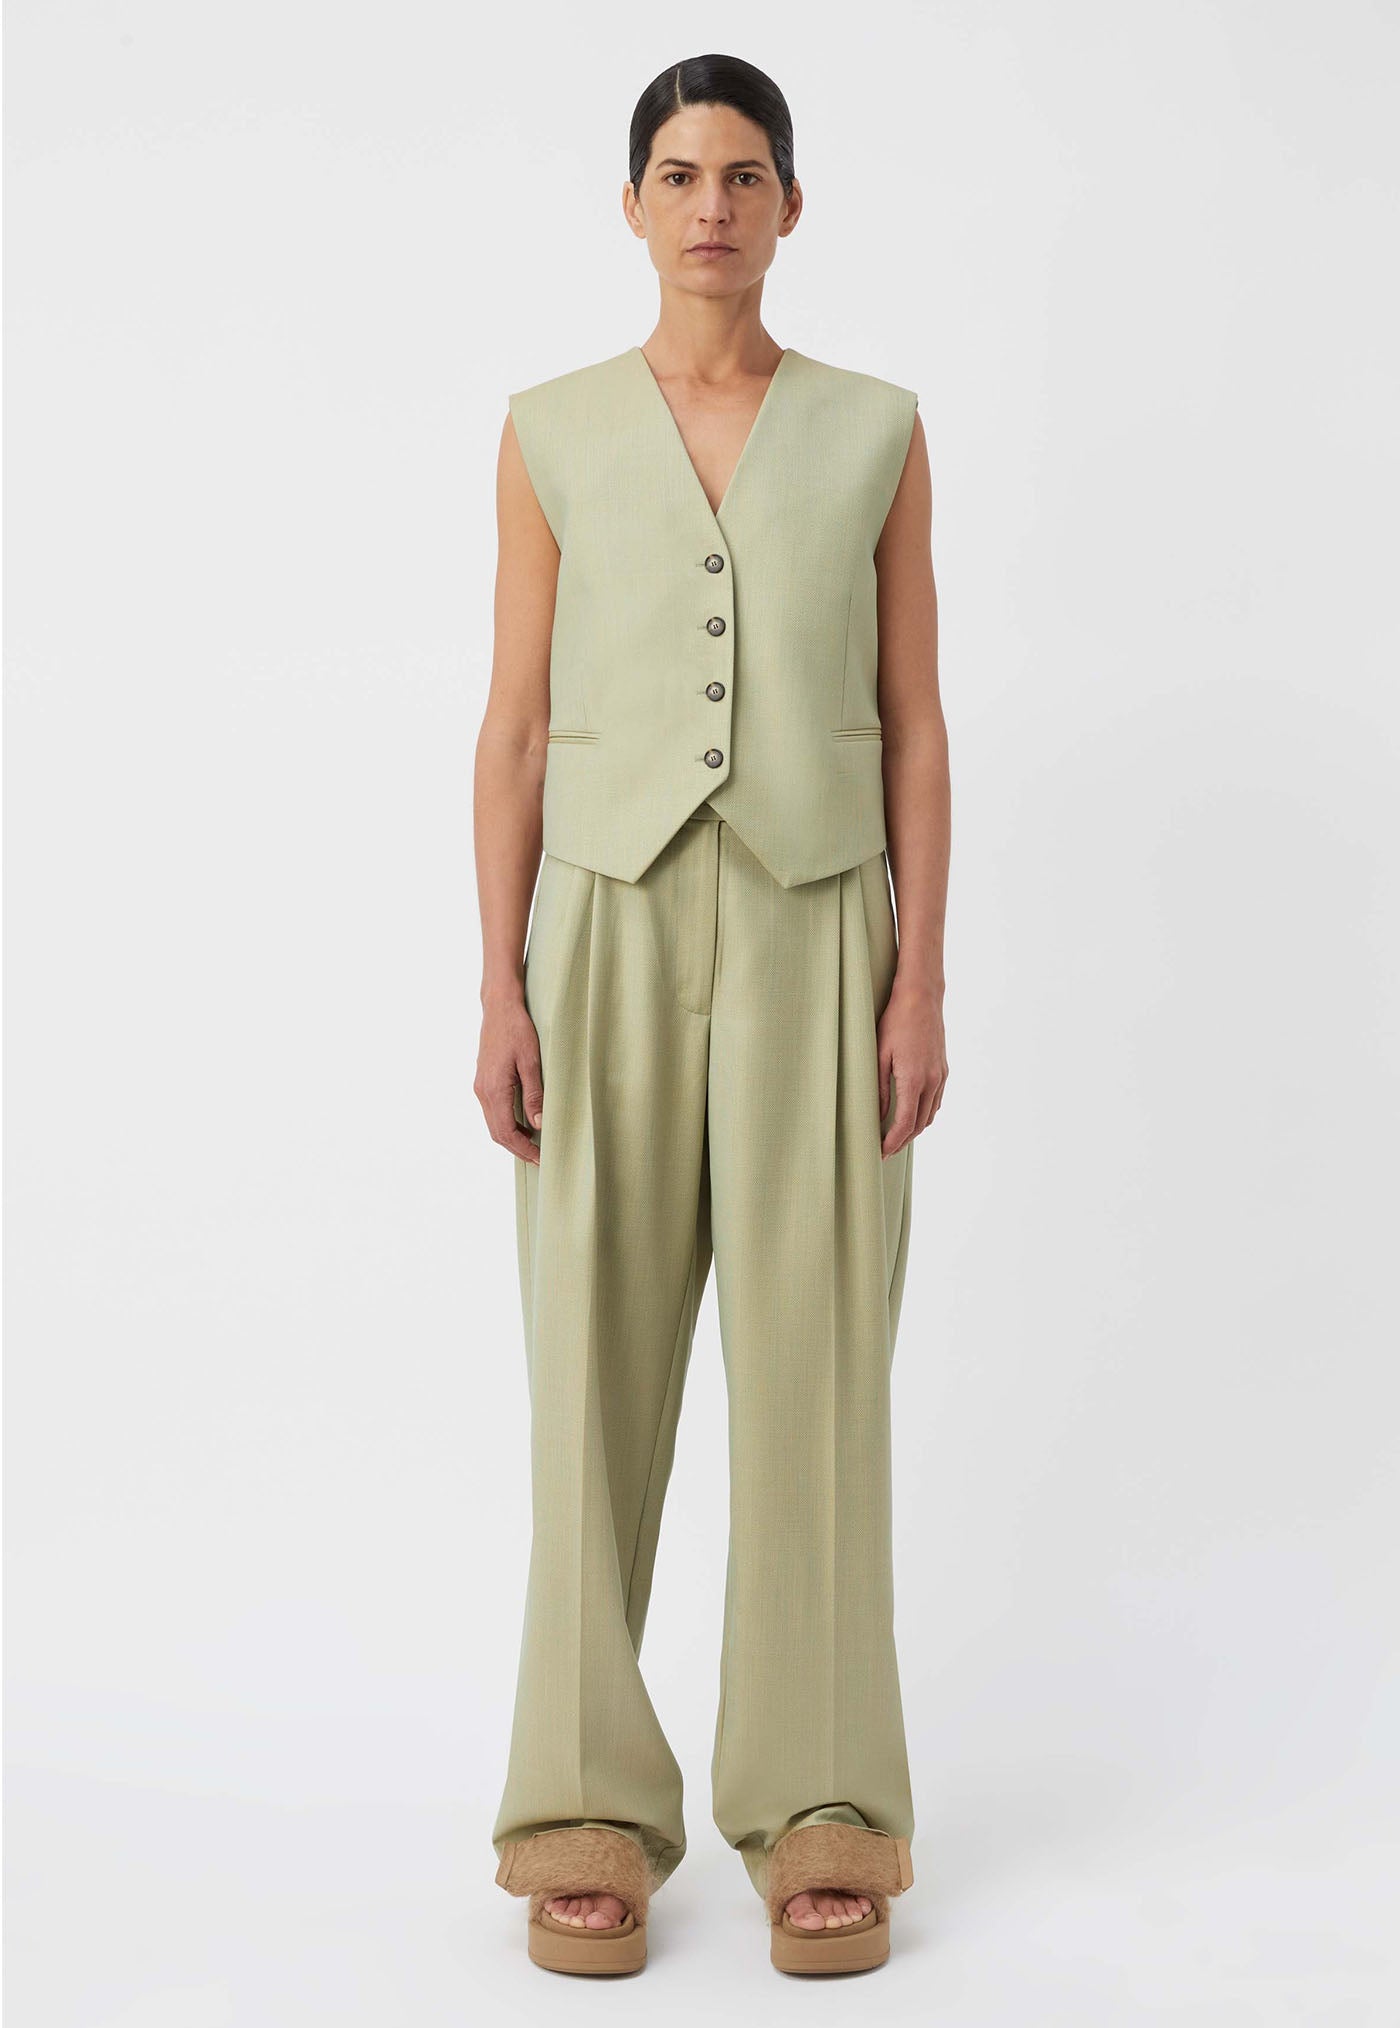 Jaccard Wool Pant - Lime Blue sold by Angel Divine